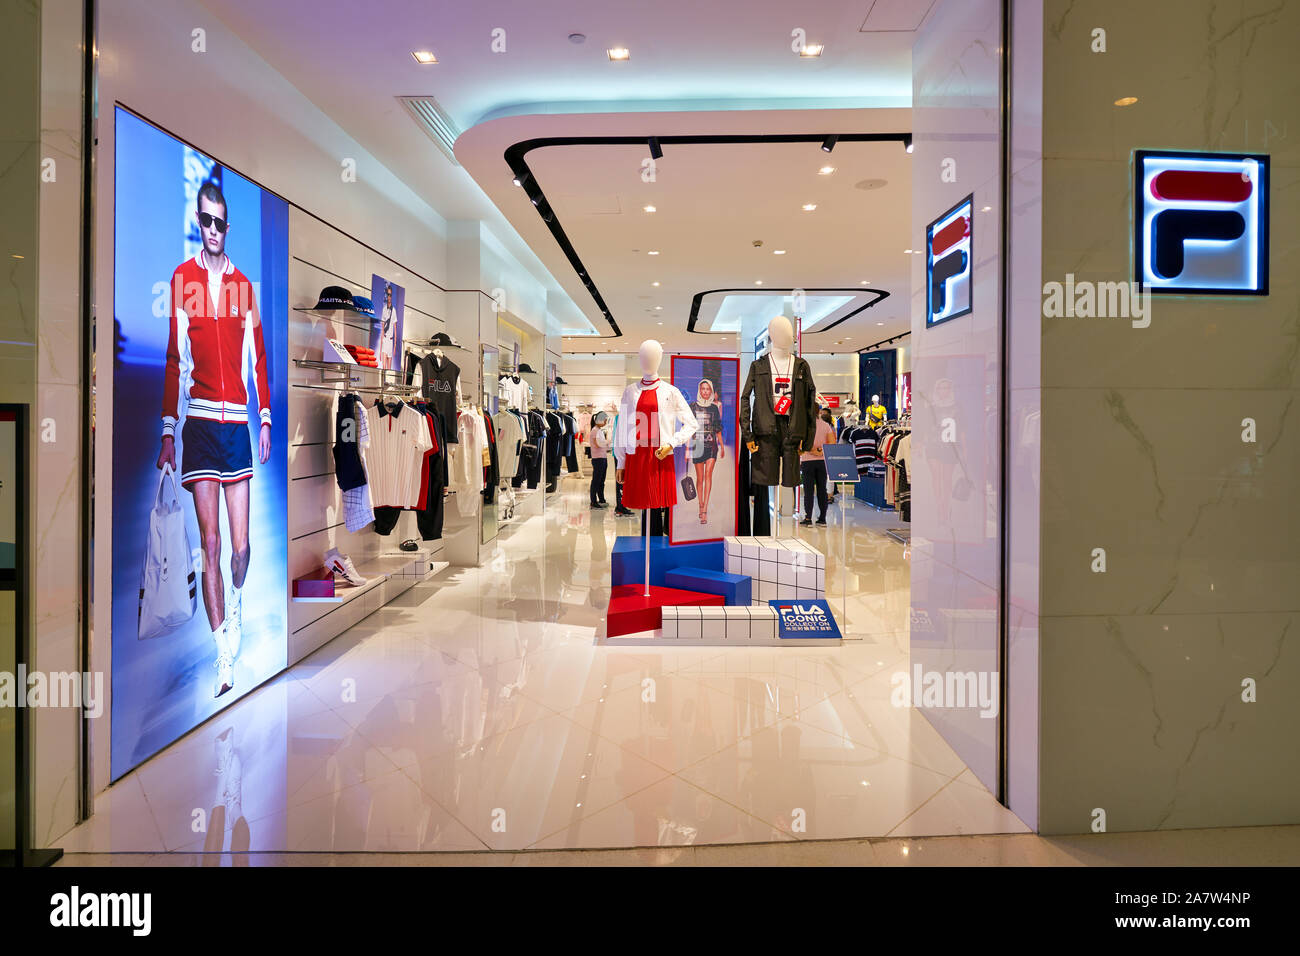 In Fila High Resolution Stock Photography and Images - Alamy